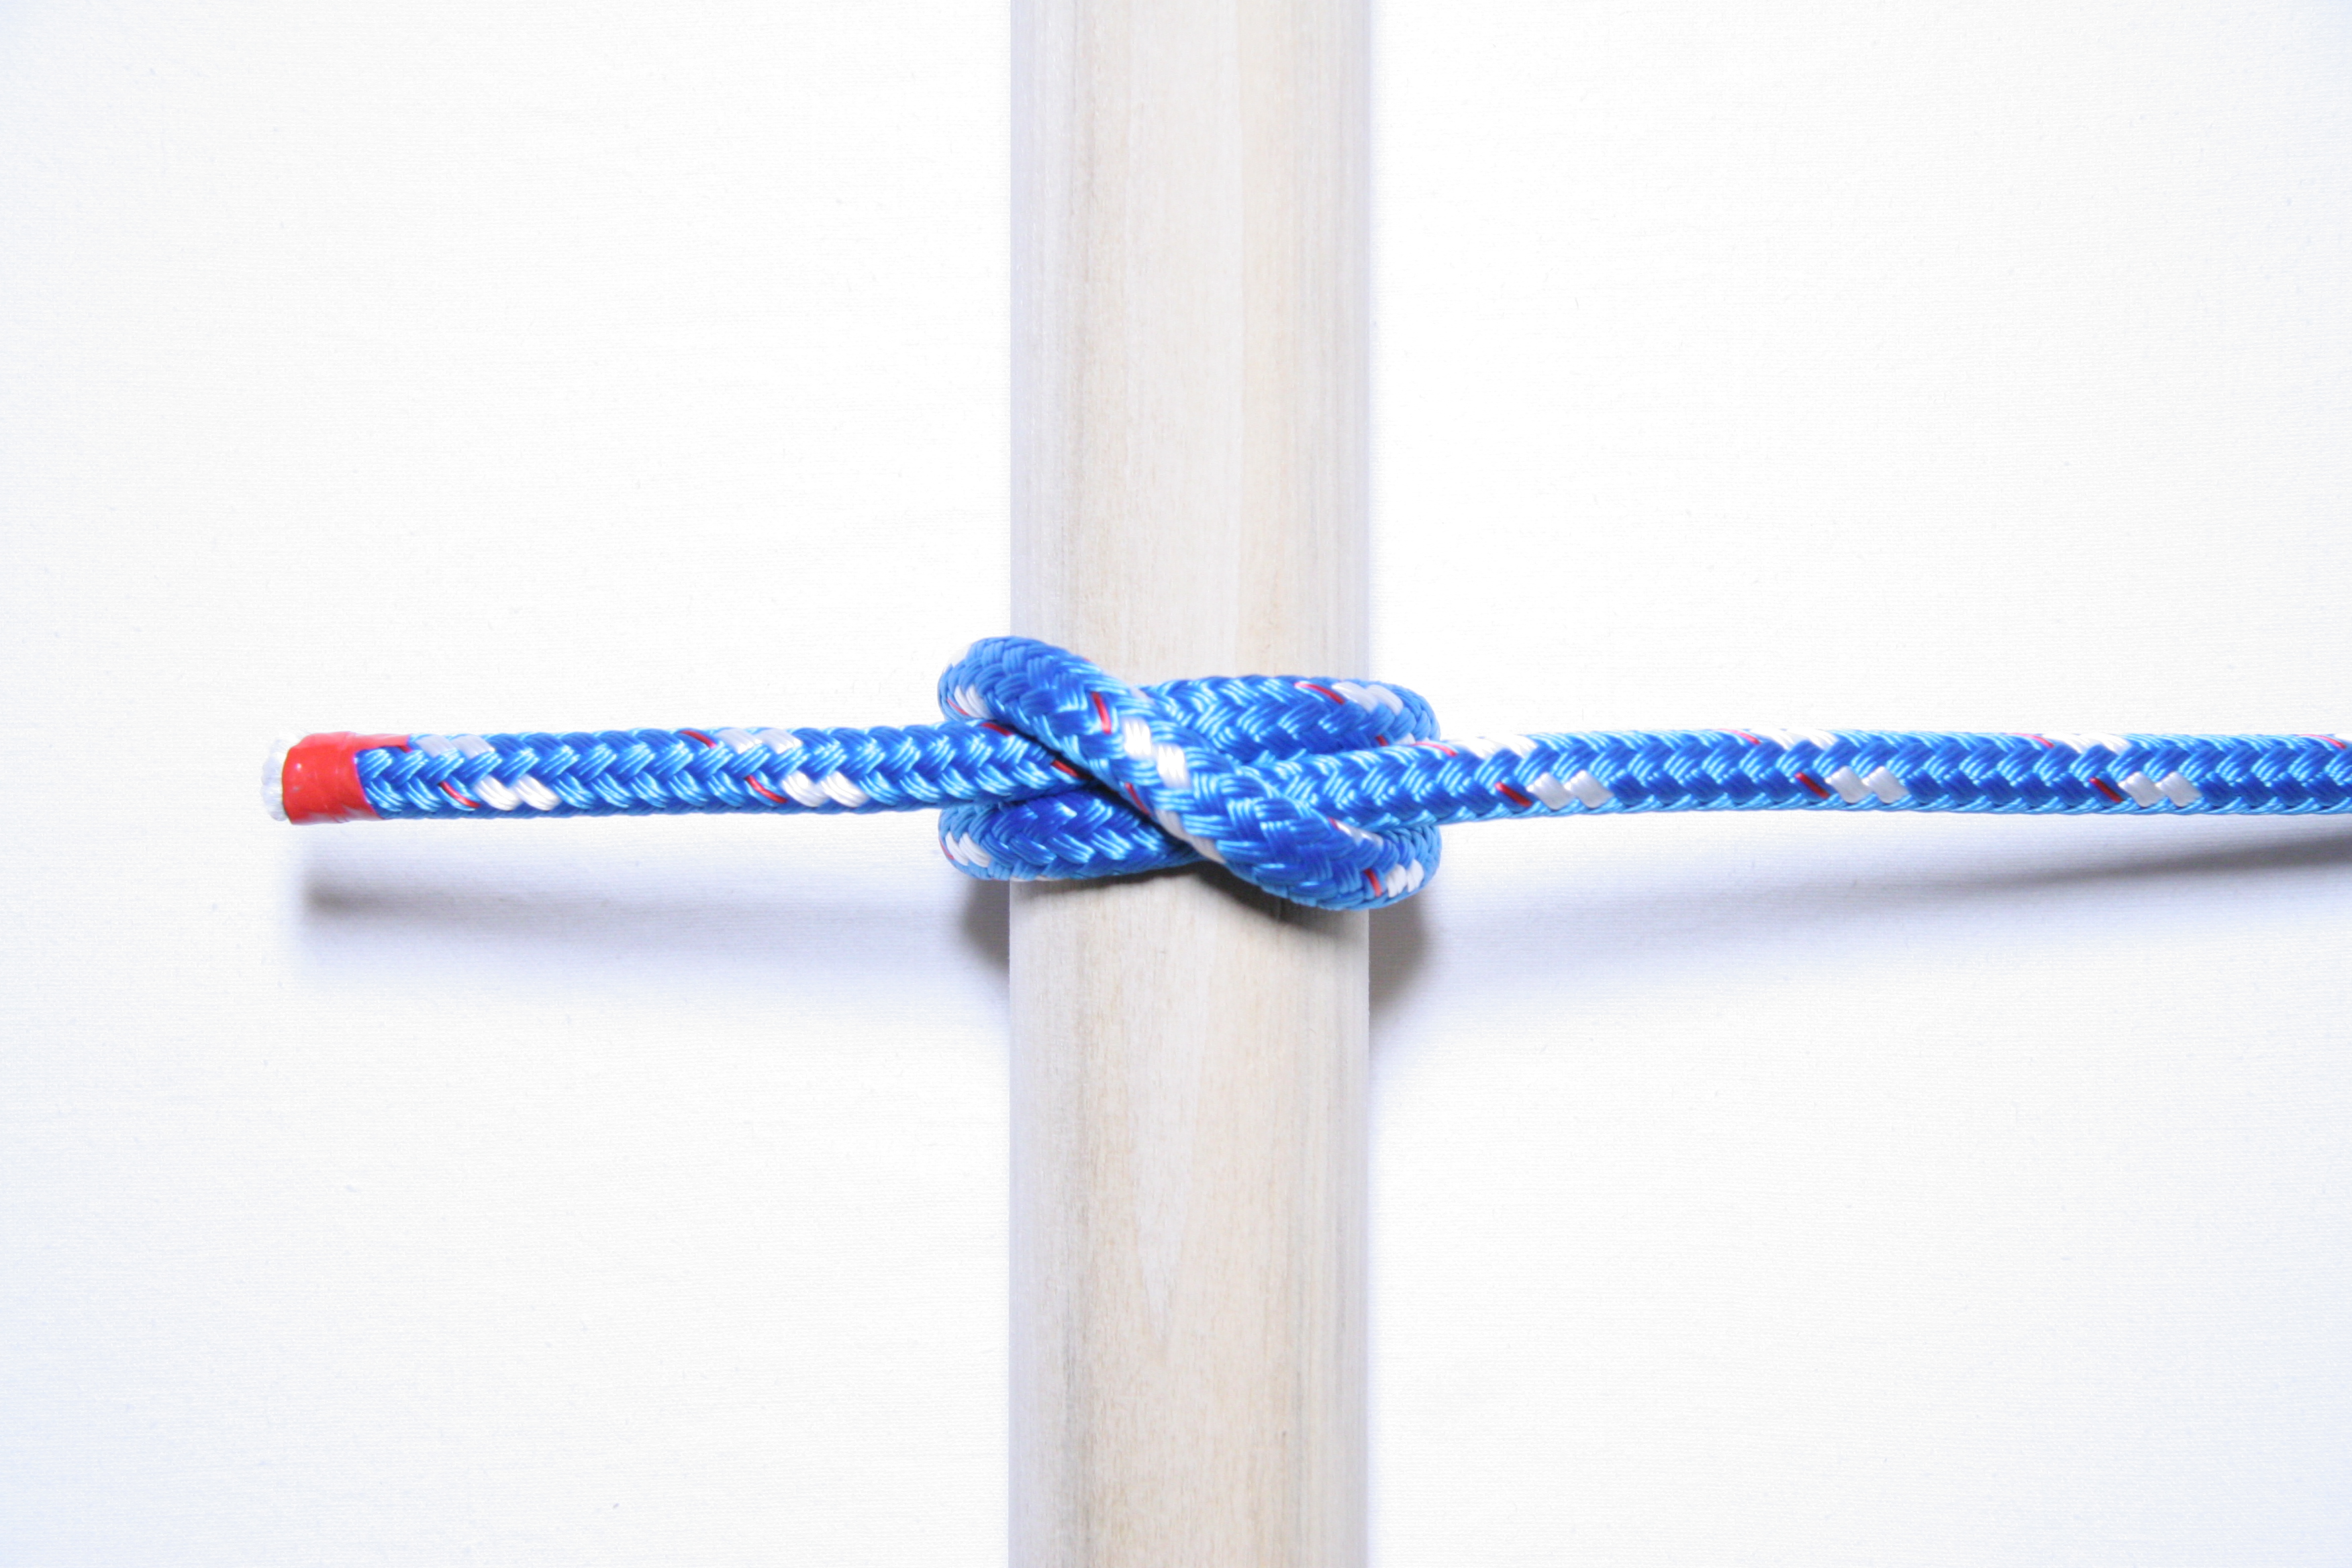 Animated Knots by Grog  Learn how to tie knots with step-by-step